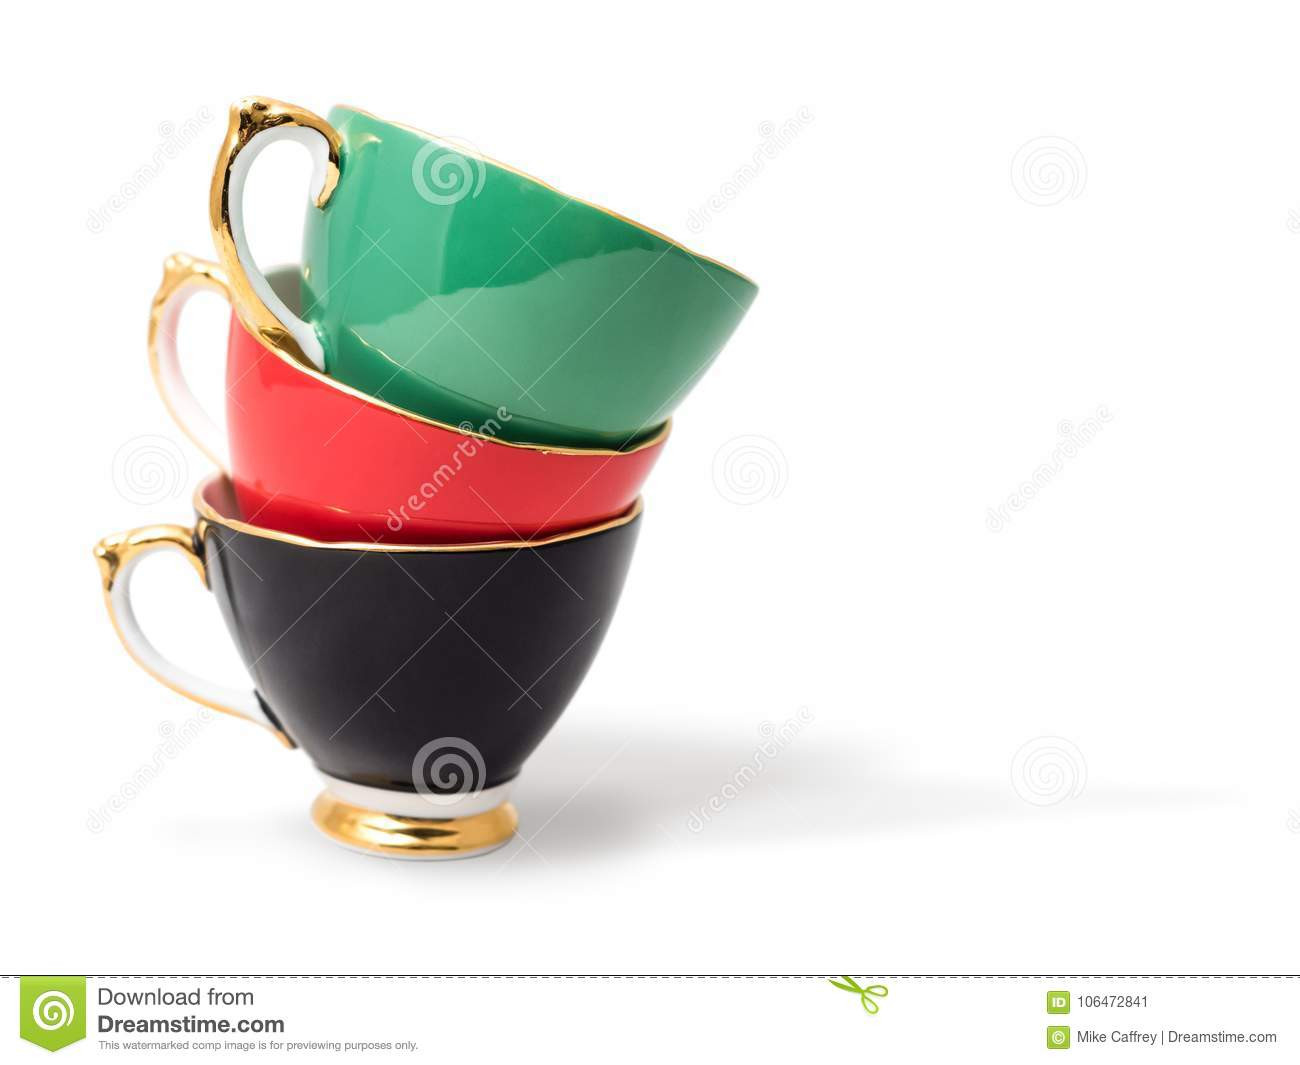 11 Best Stacked Teacup Vase 2024 free download stacked teacup vase of a stack of tea cups stock image image of trim stack 106472841 regarding download a stack of tea cups stock image image of trim stack 106472841